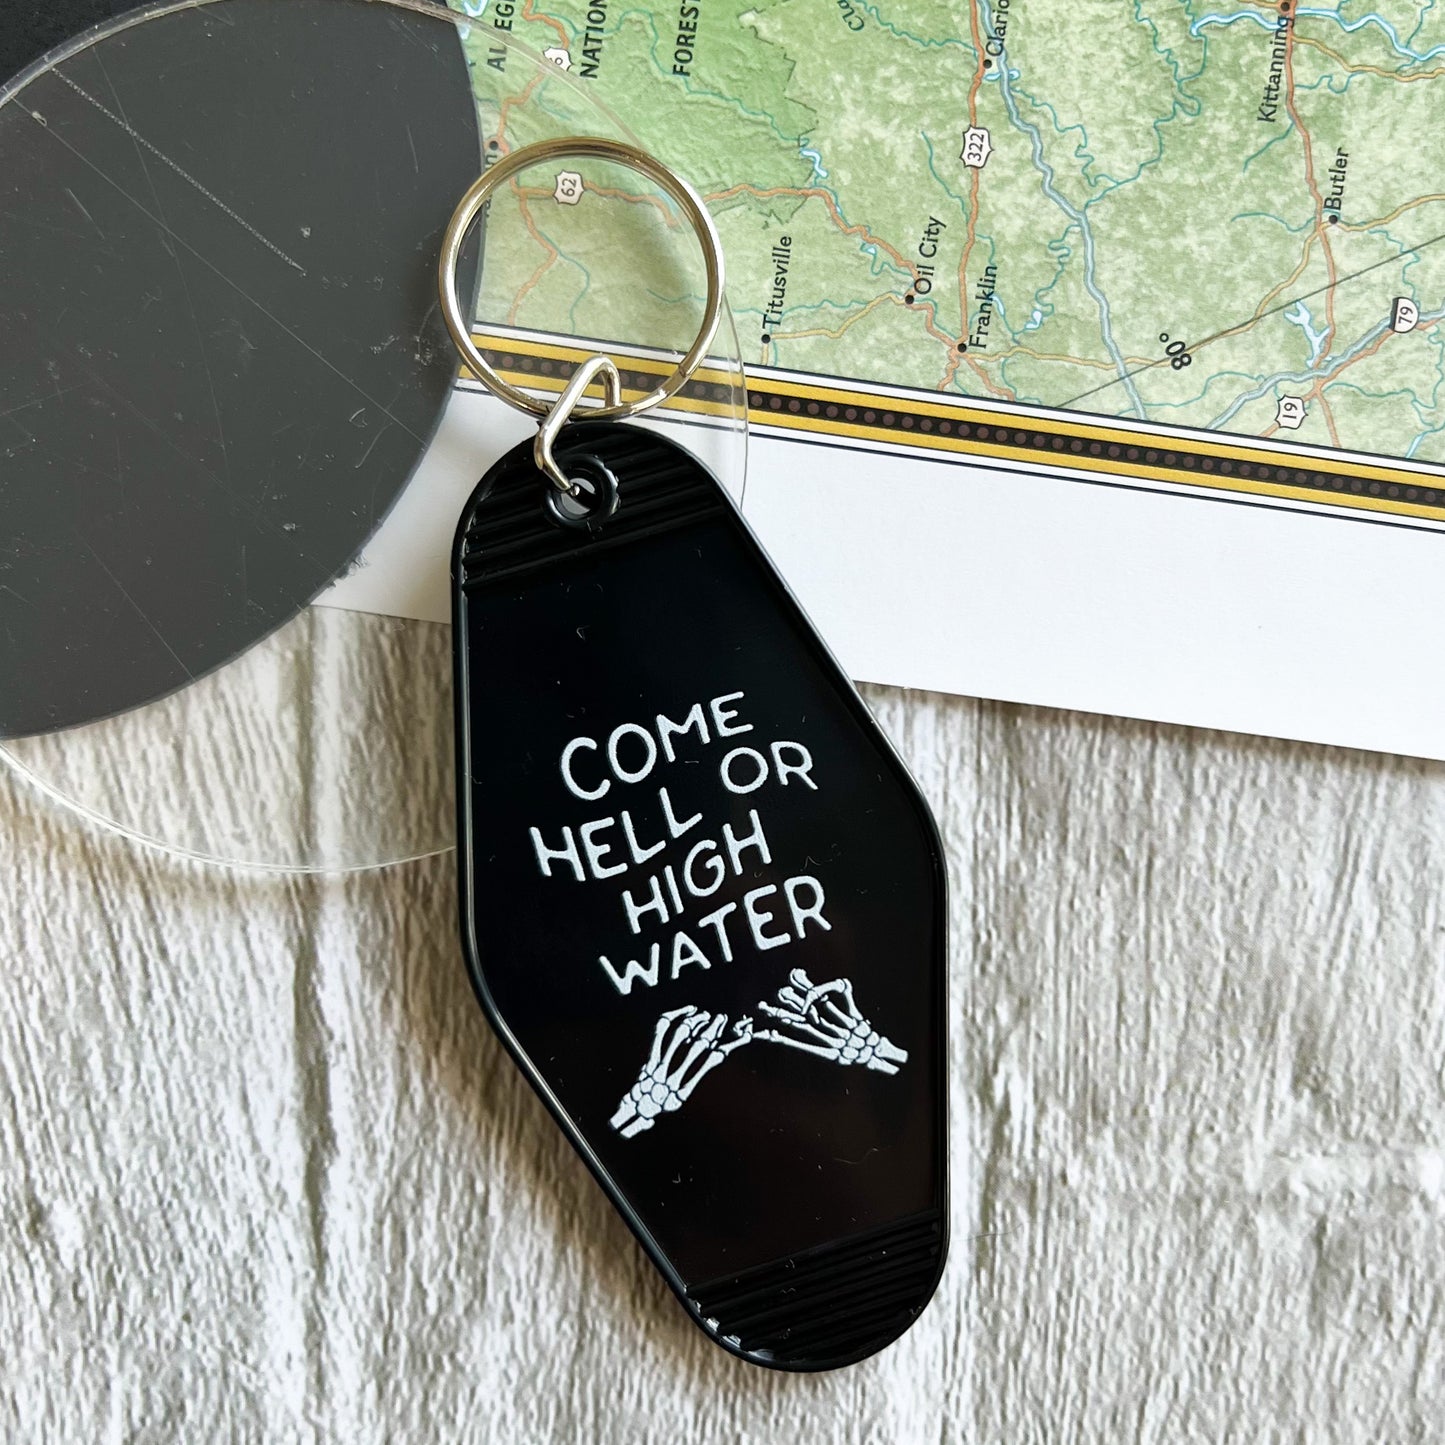 come hell or high water // motel keychain